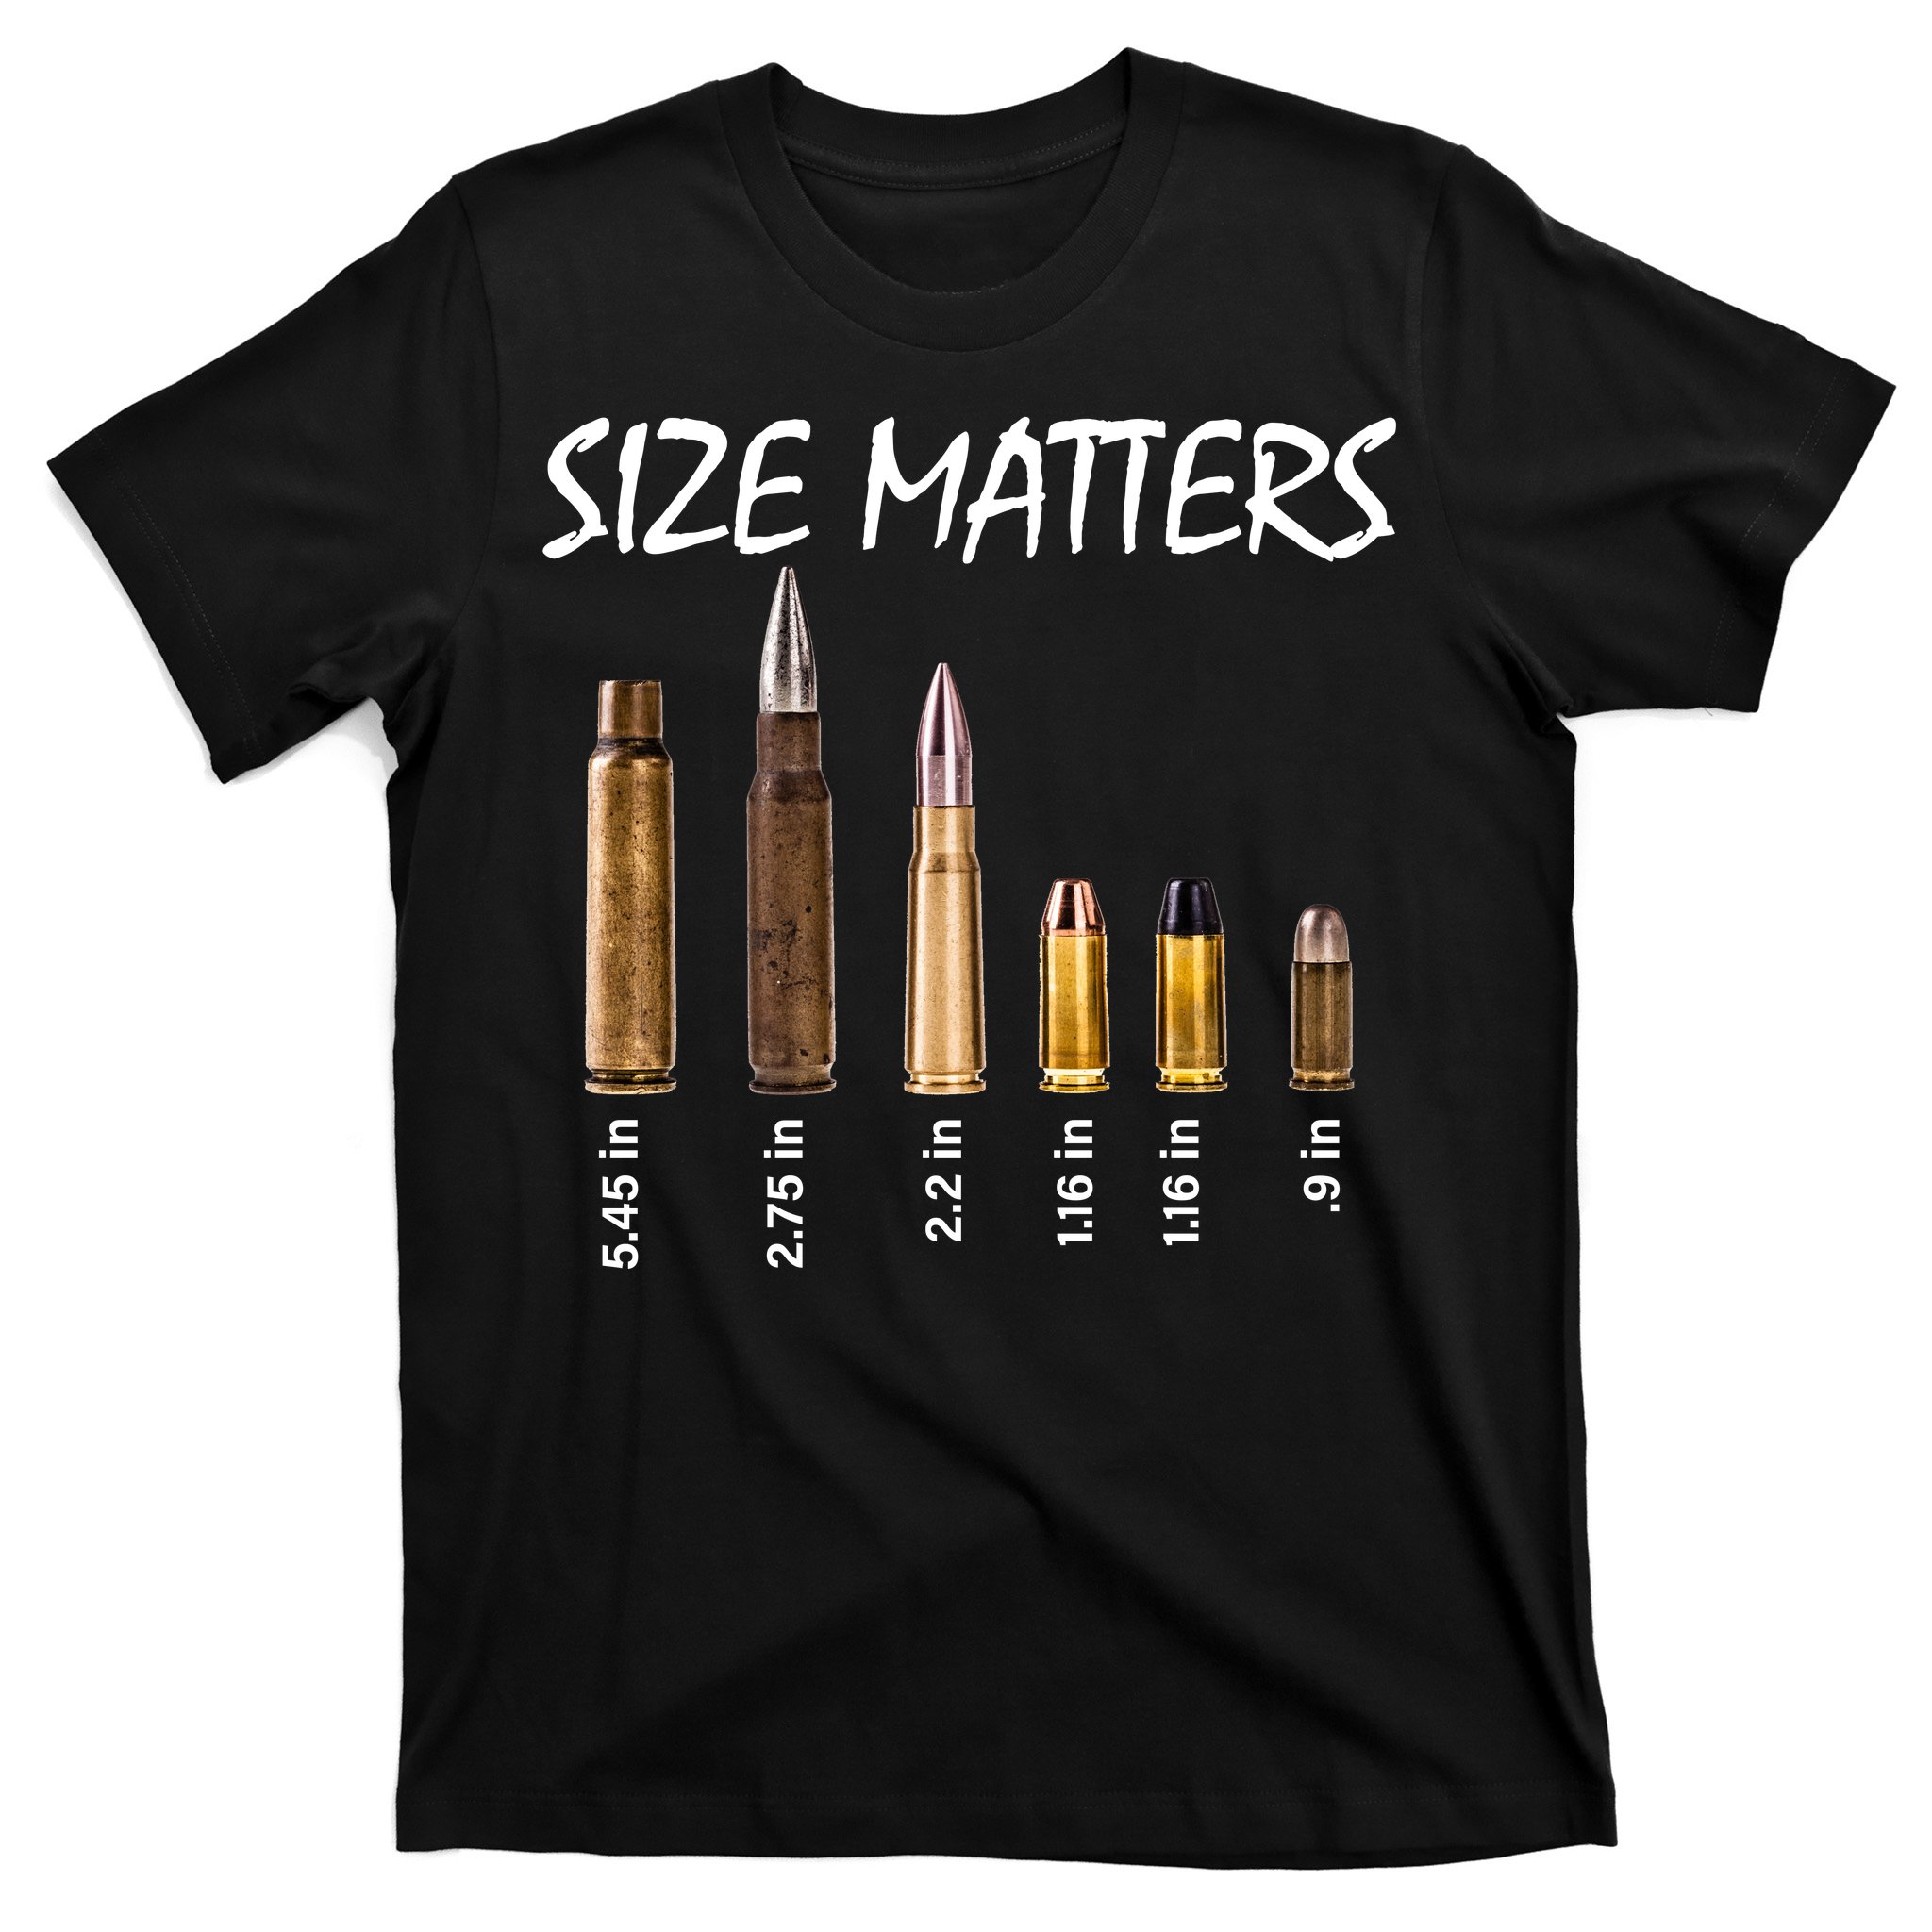 Gun Control Rights Ammo Protect Freedom Tank T-Shirt Size Does Matter 